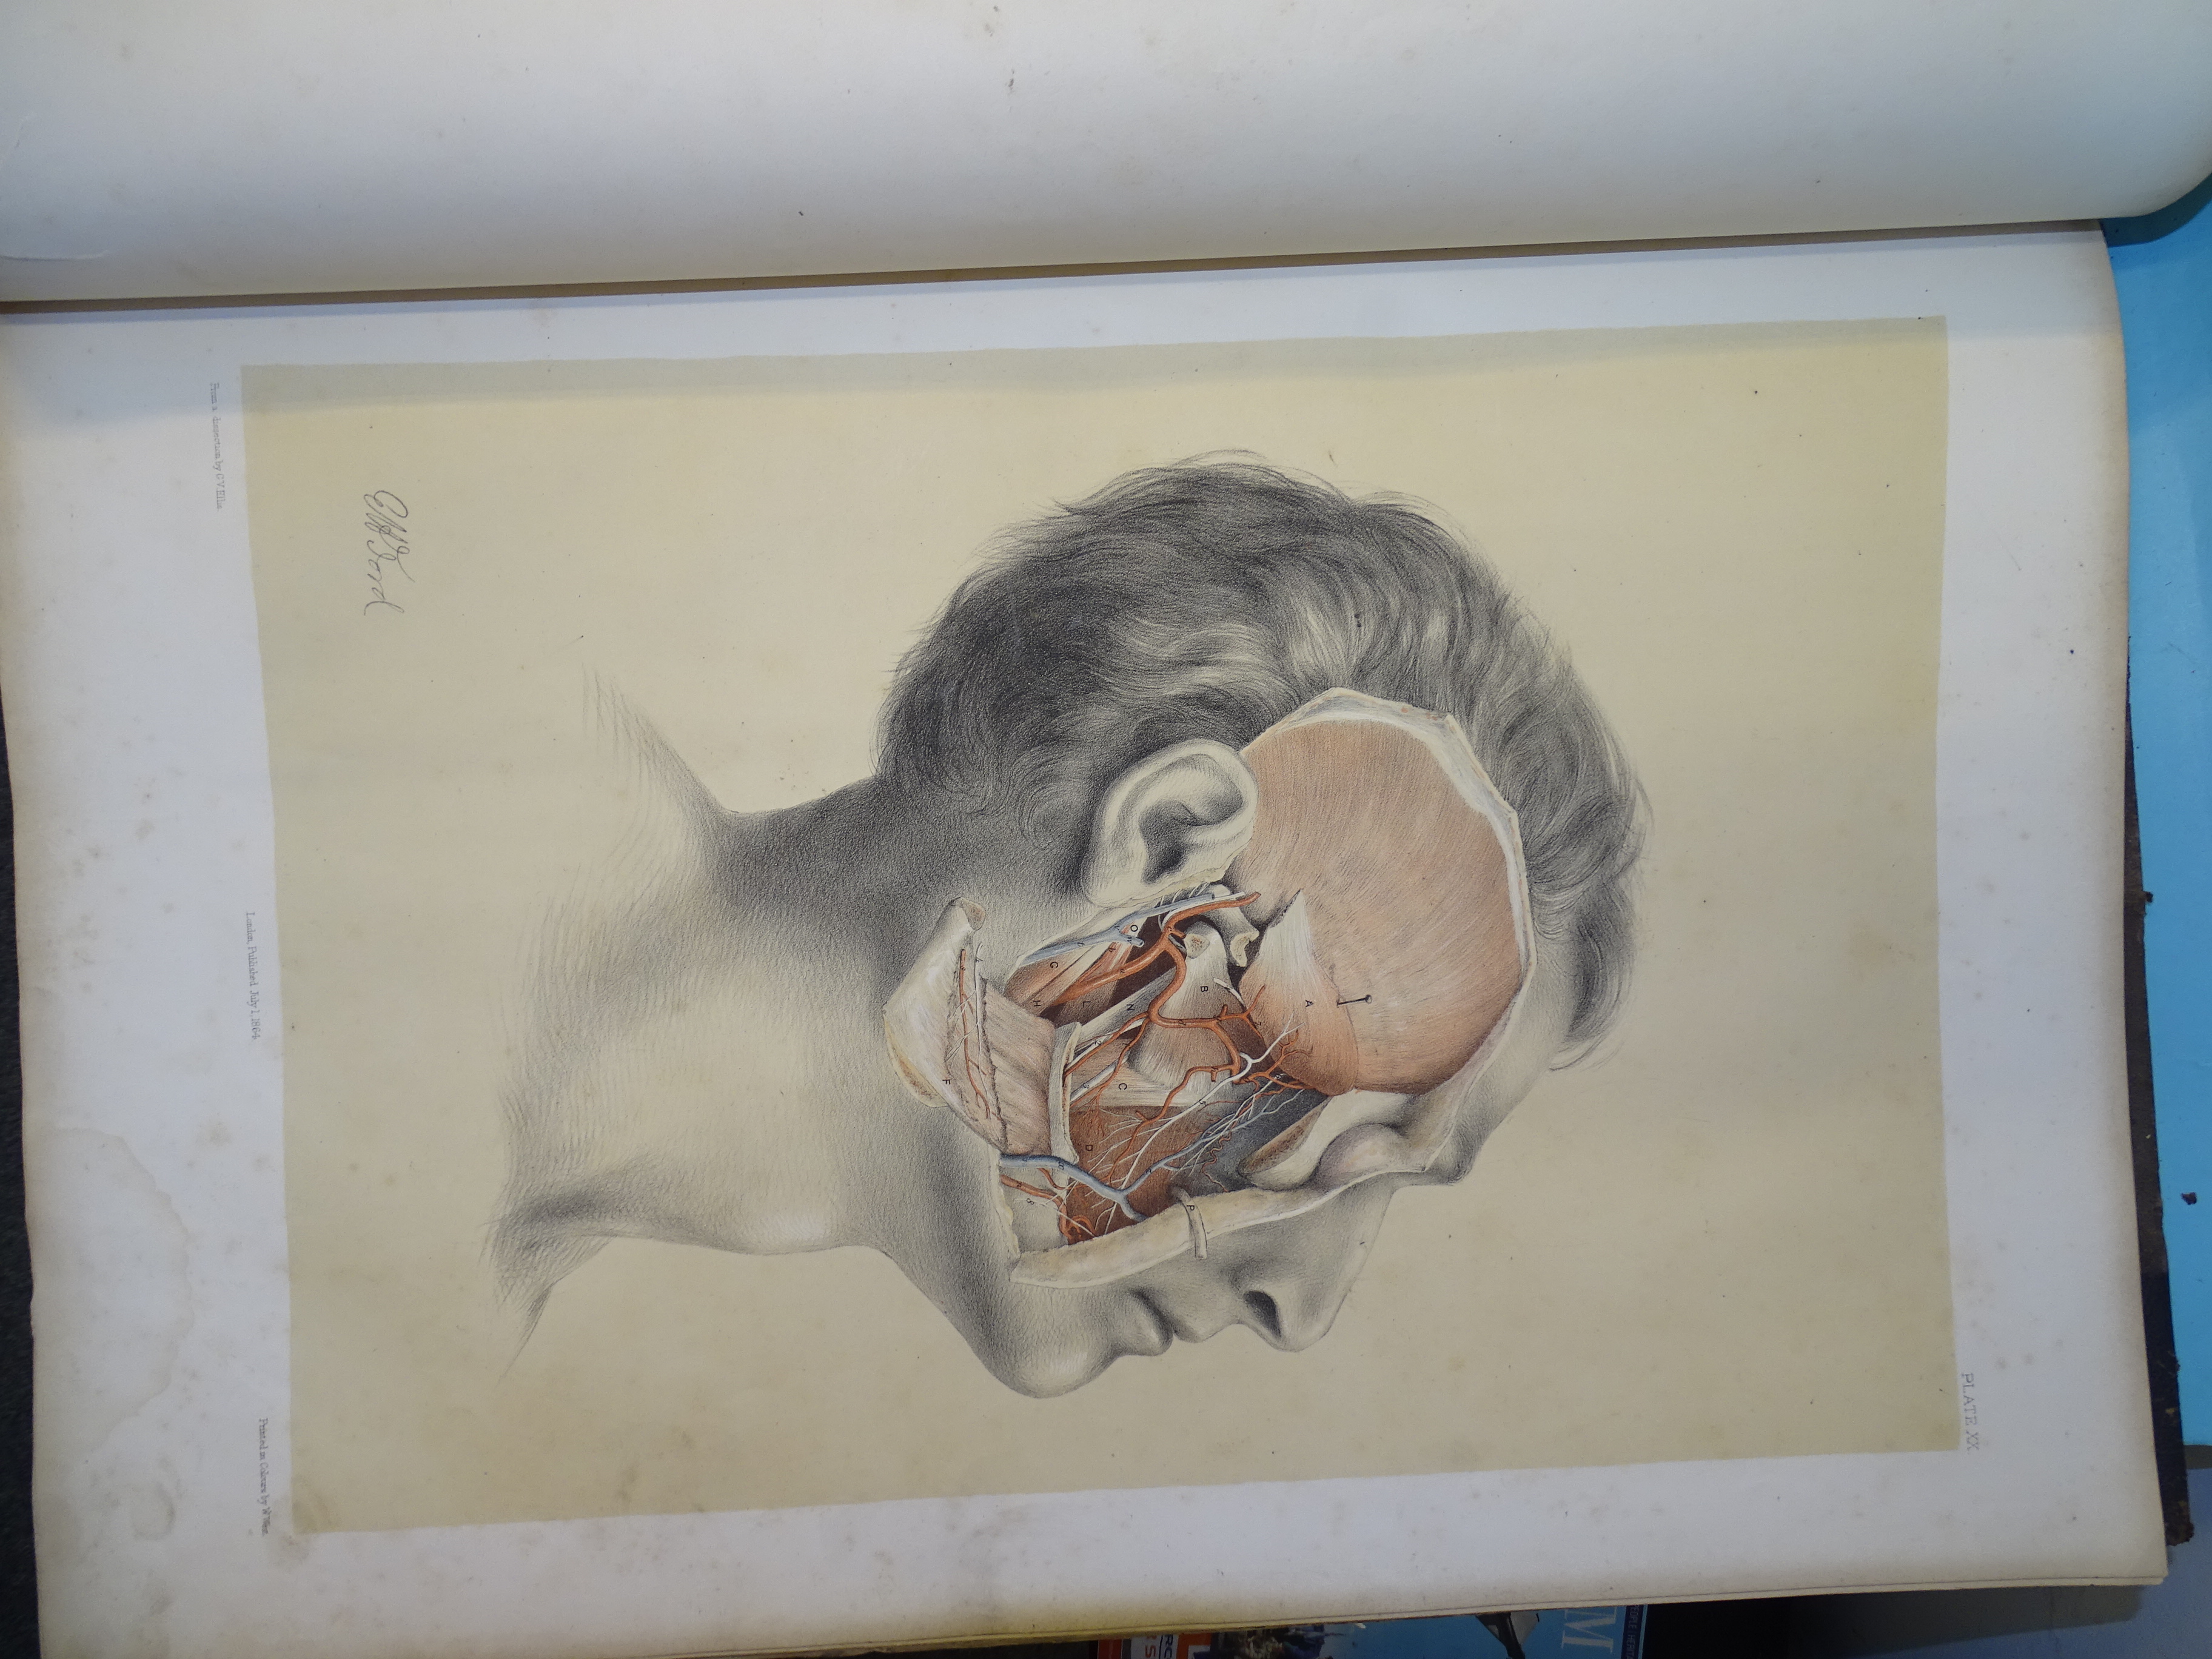 Ellis (George Viner) & Ford (G H), Illustrations of Dissections in a Series of Original Coloured - Image 6 of 9